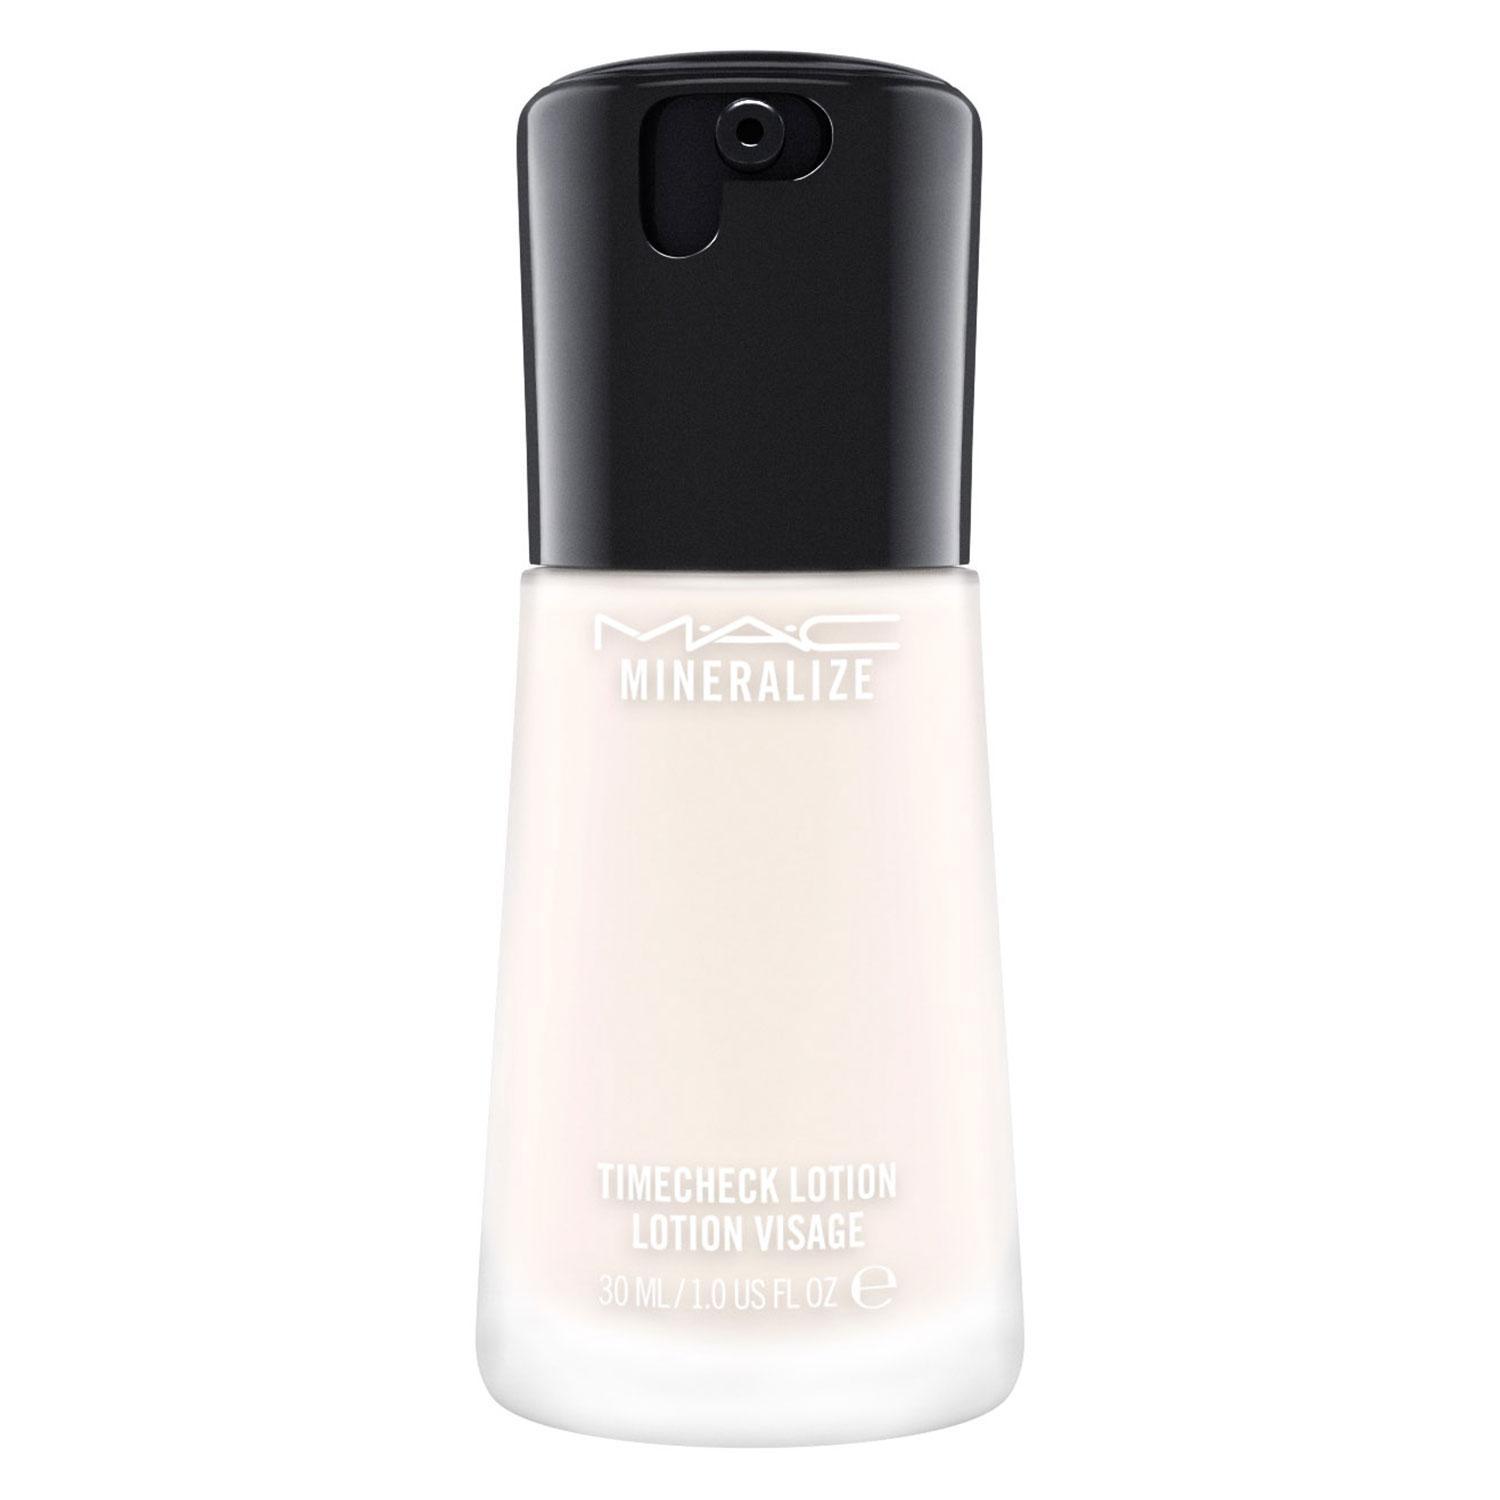 M·A·C Skin Care - Mineralize Timecheck Lotion